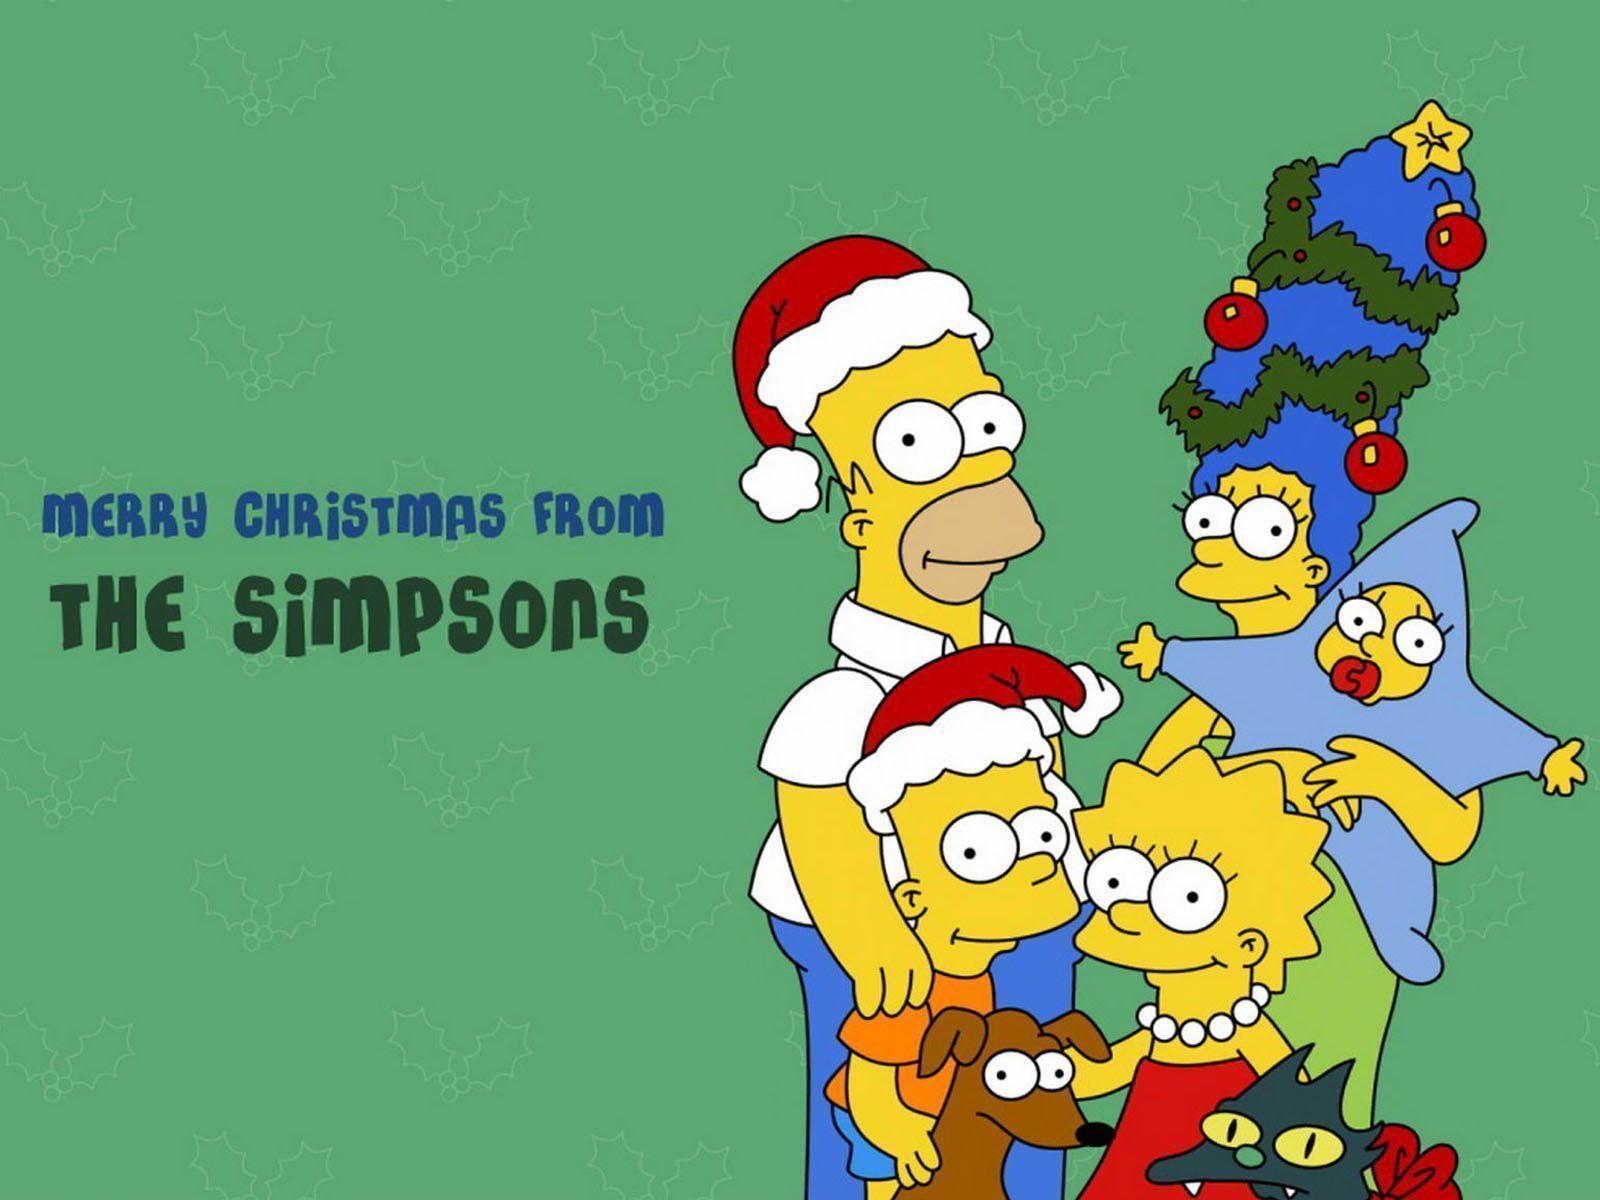 The Simpson Christmas Pictures and Wallpapers.